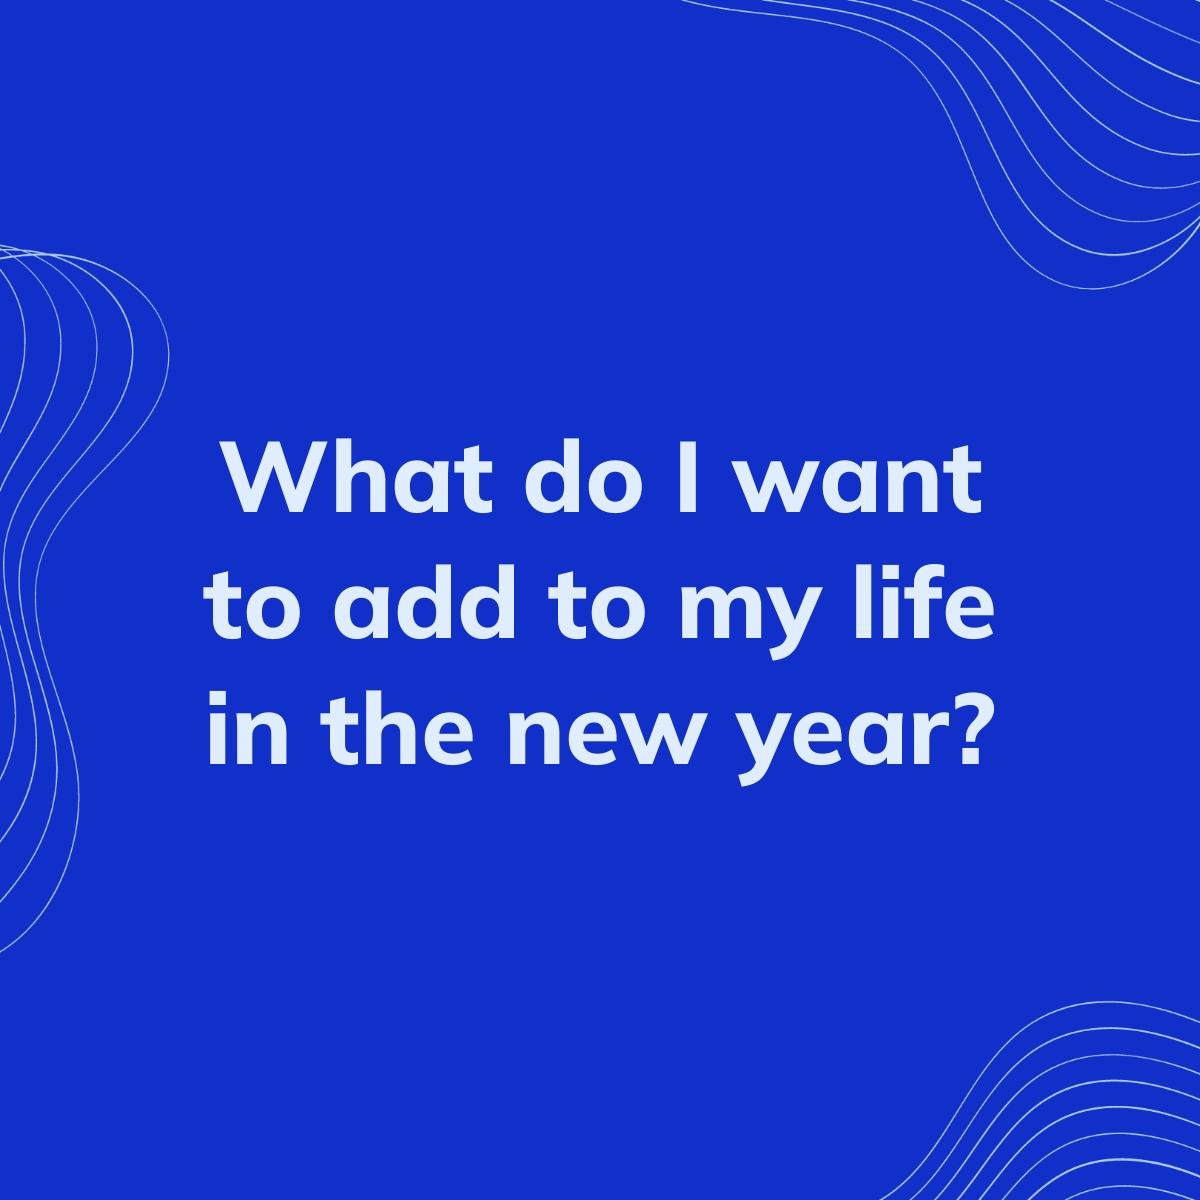 Journal Prompt: What do I want to add to my life in the new year?